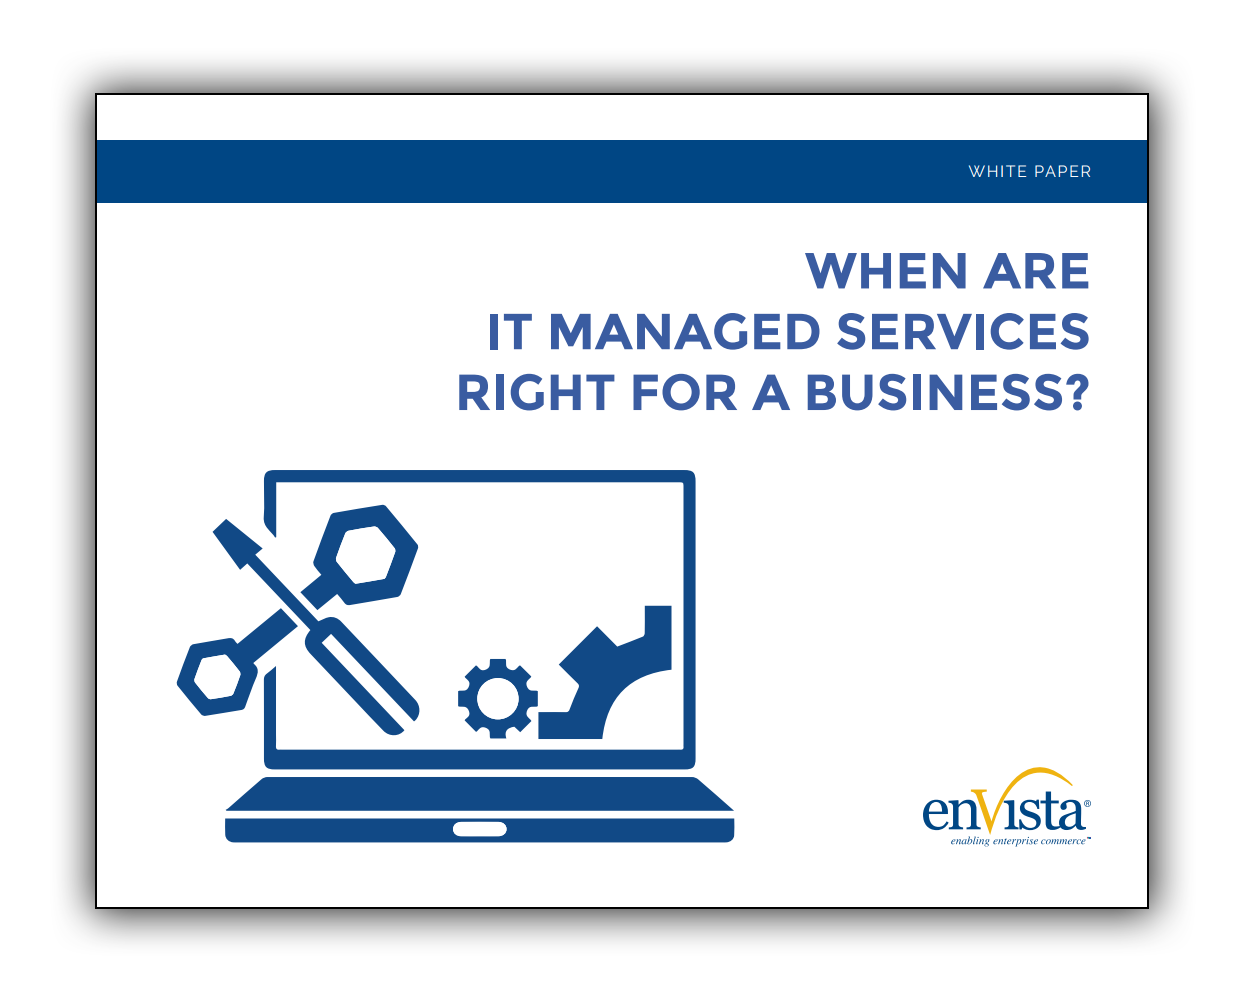 Image_when-are-it-managed-services-right-for-a-business.png